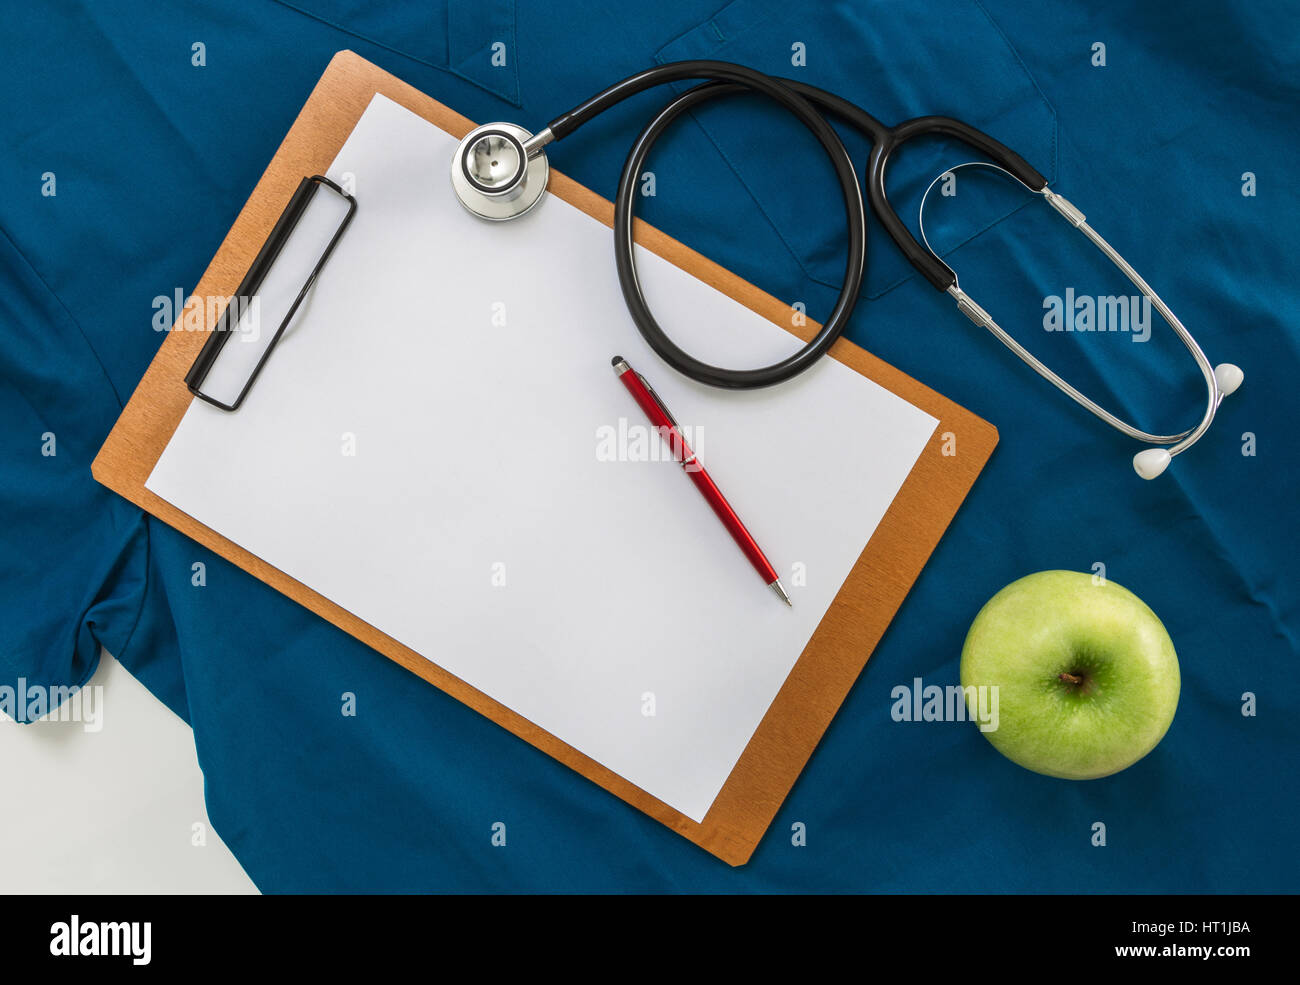 Clipboard with stethoscope on doctor's shirt. Stock Photo